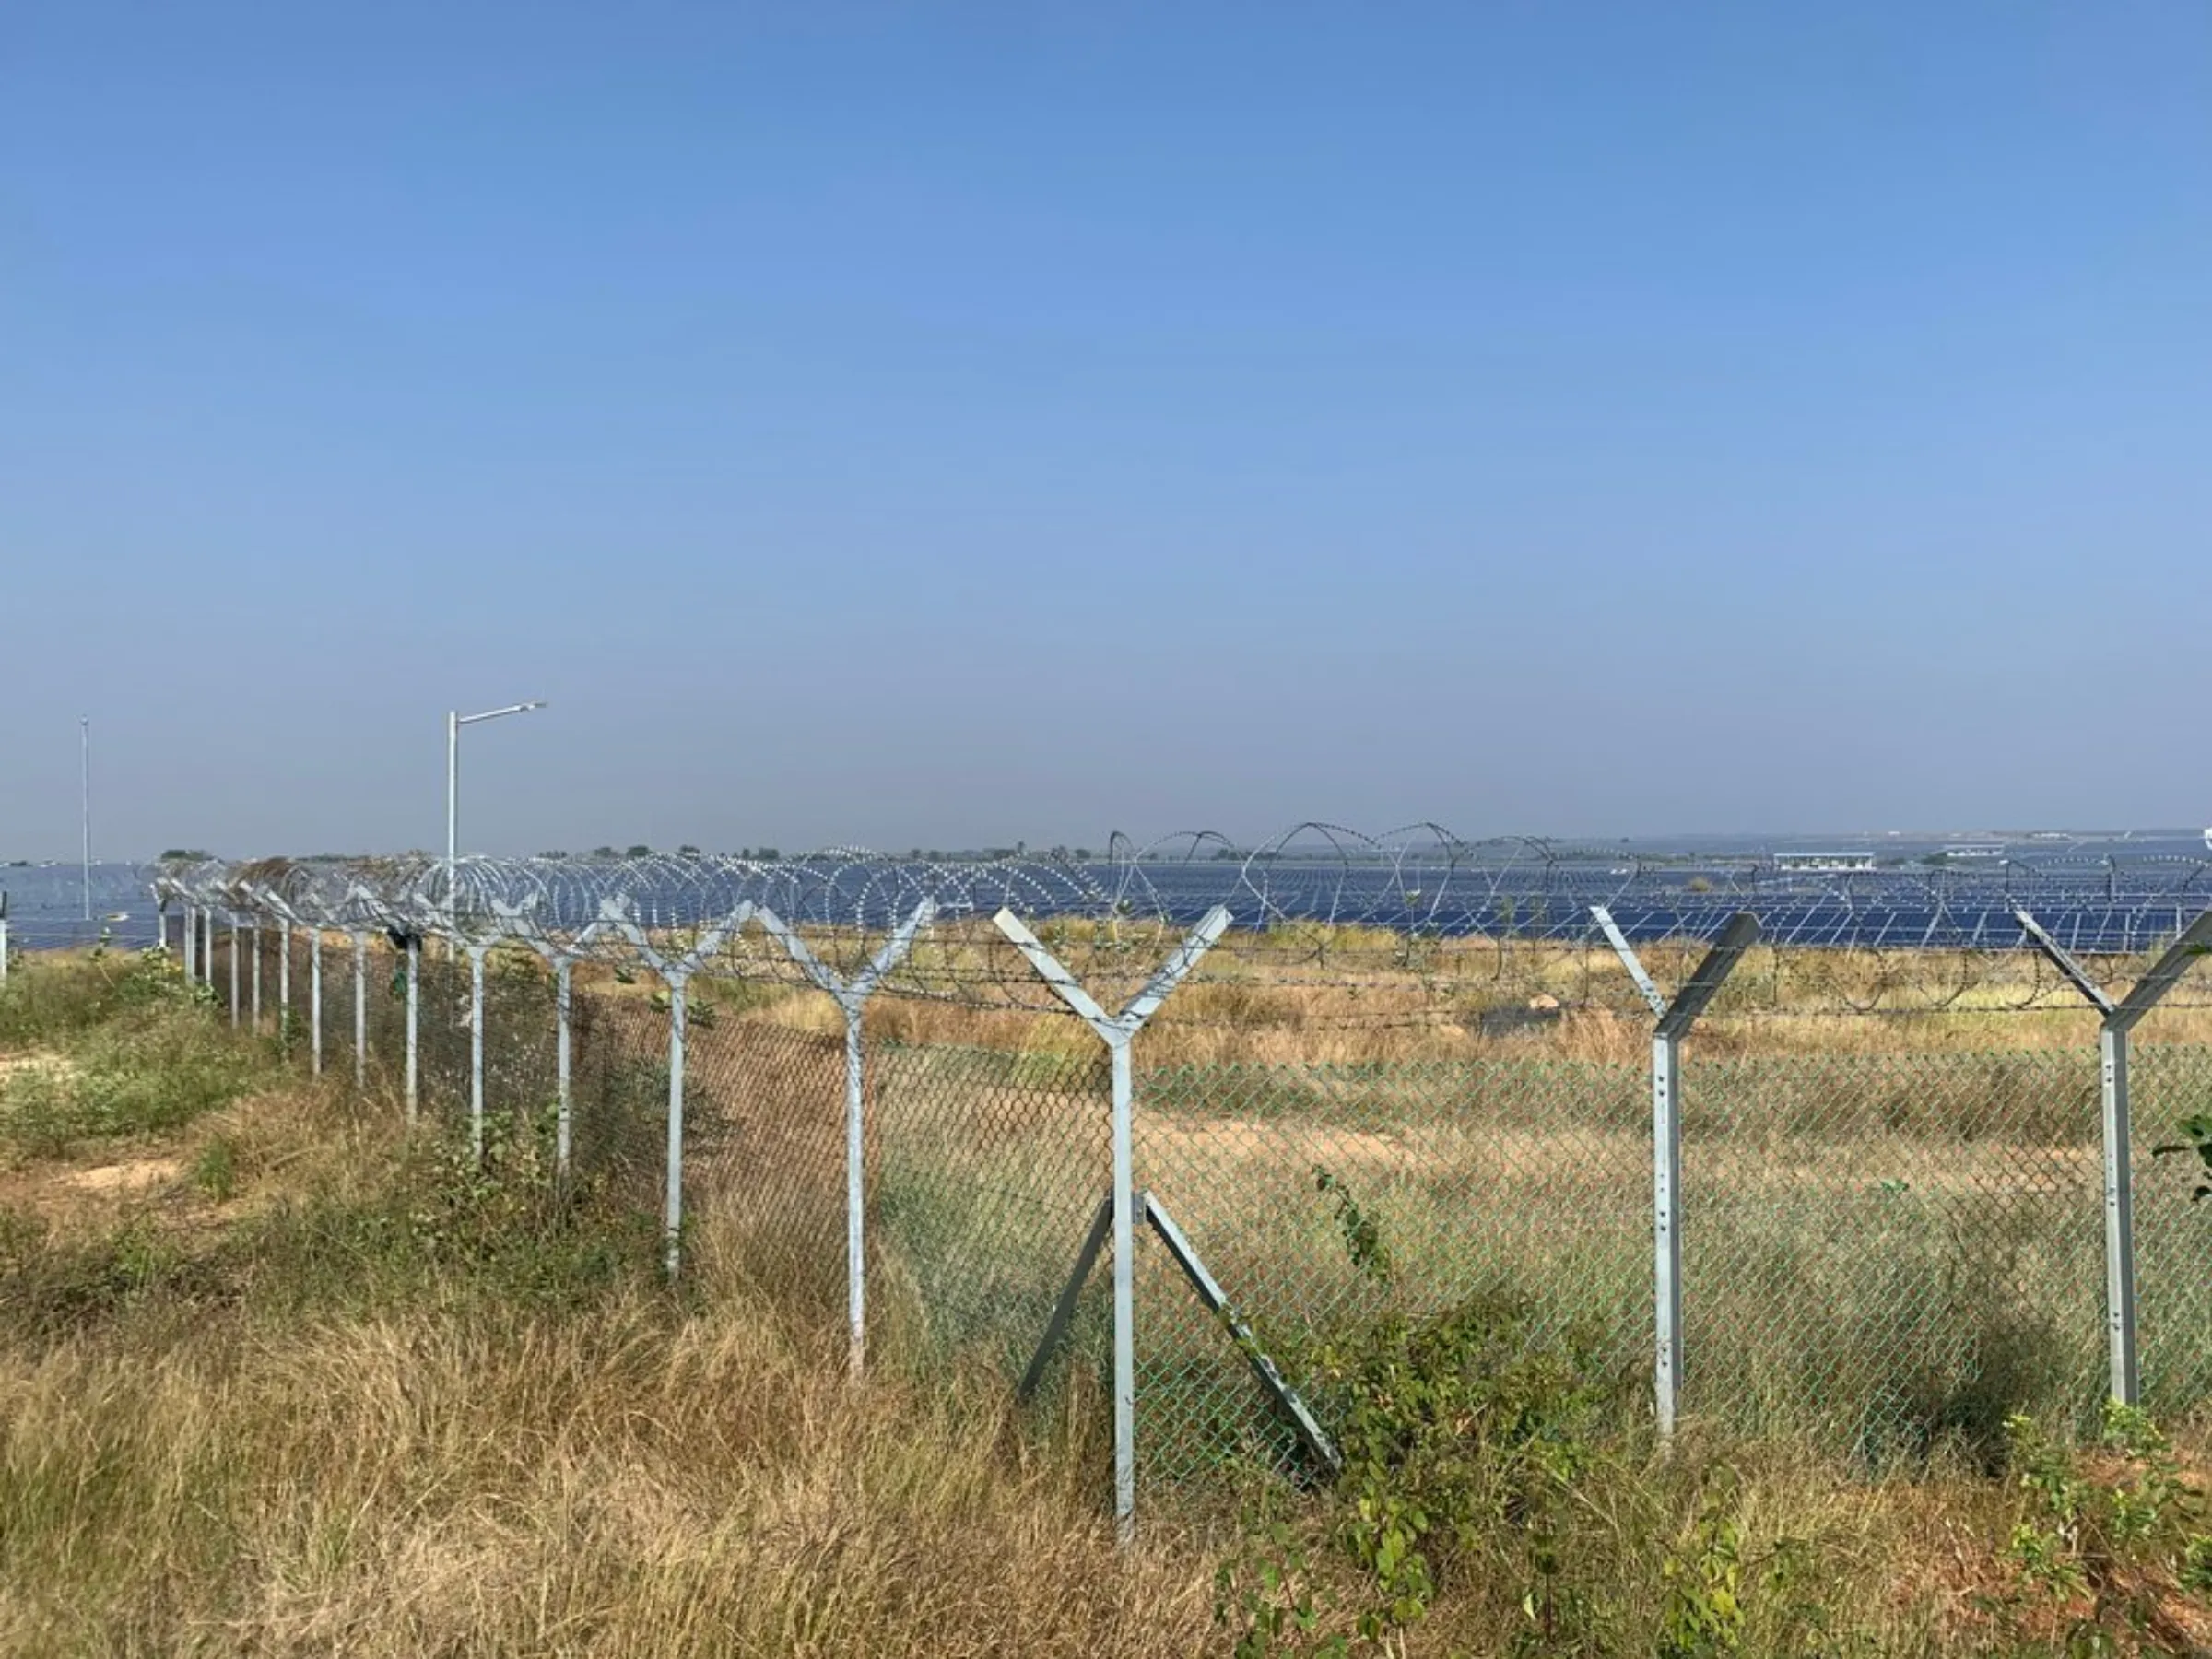 Fences separate the Pavagada solar park from the villages nearby in Karnataka, India, December 27, 2021